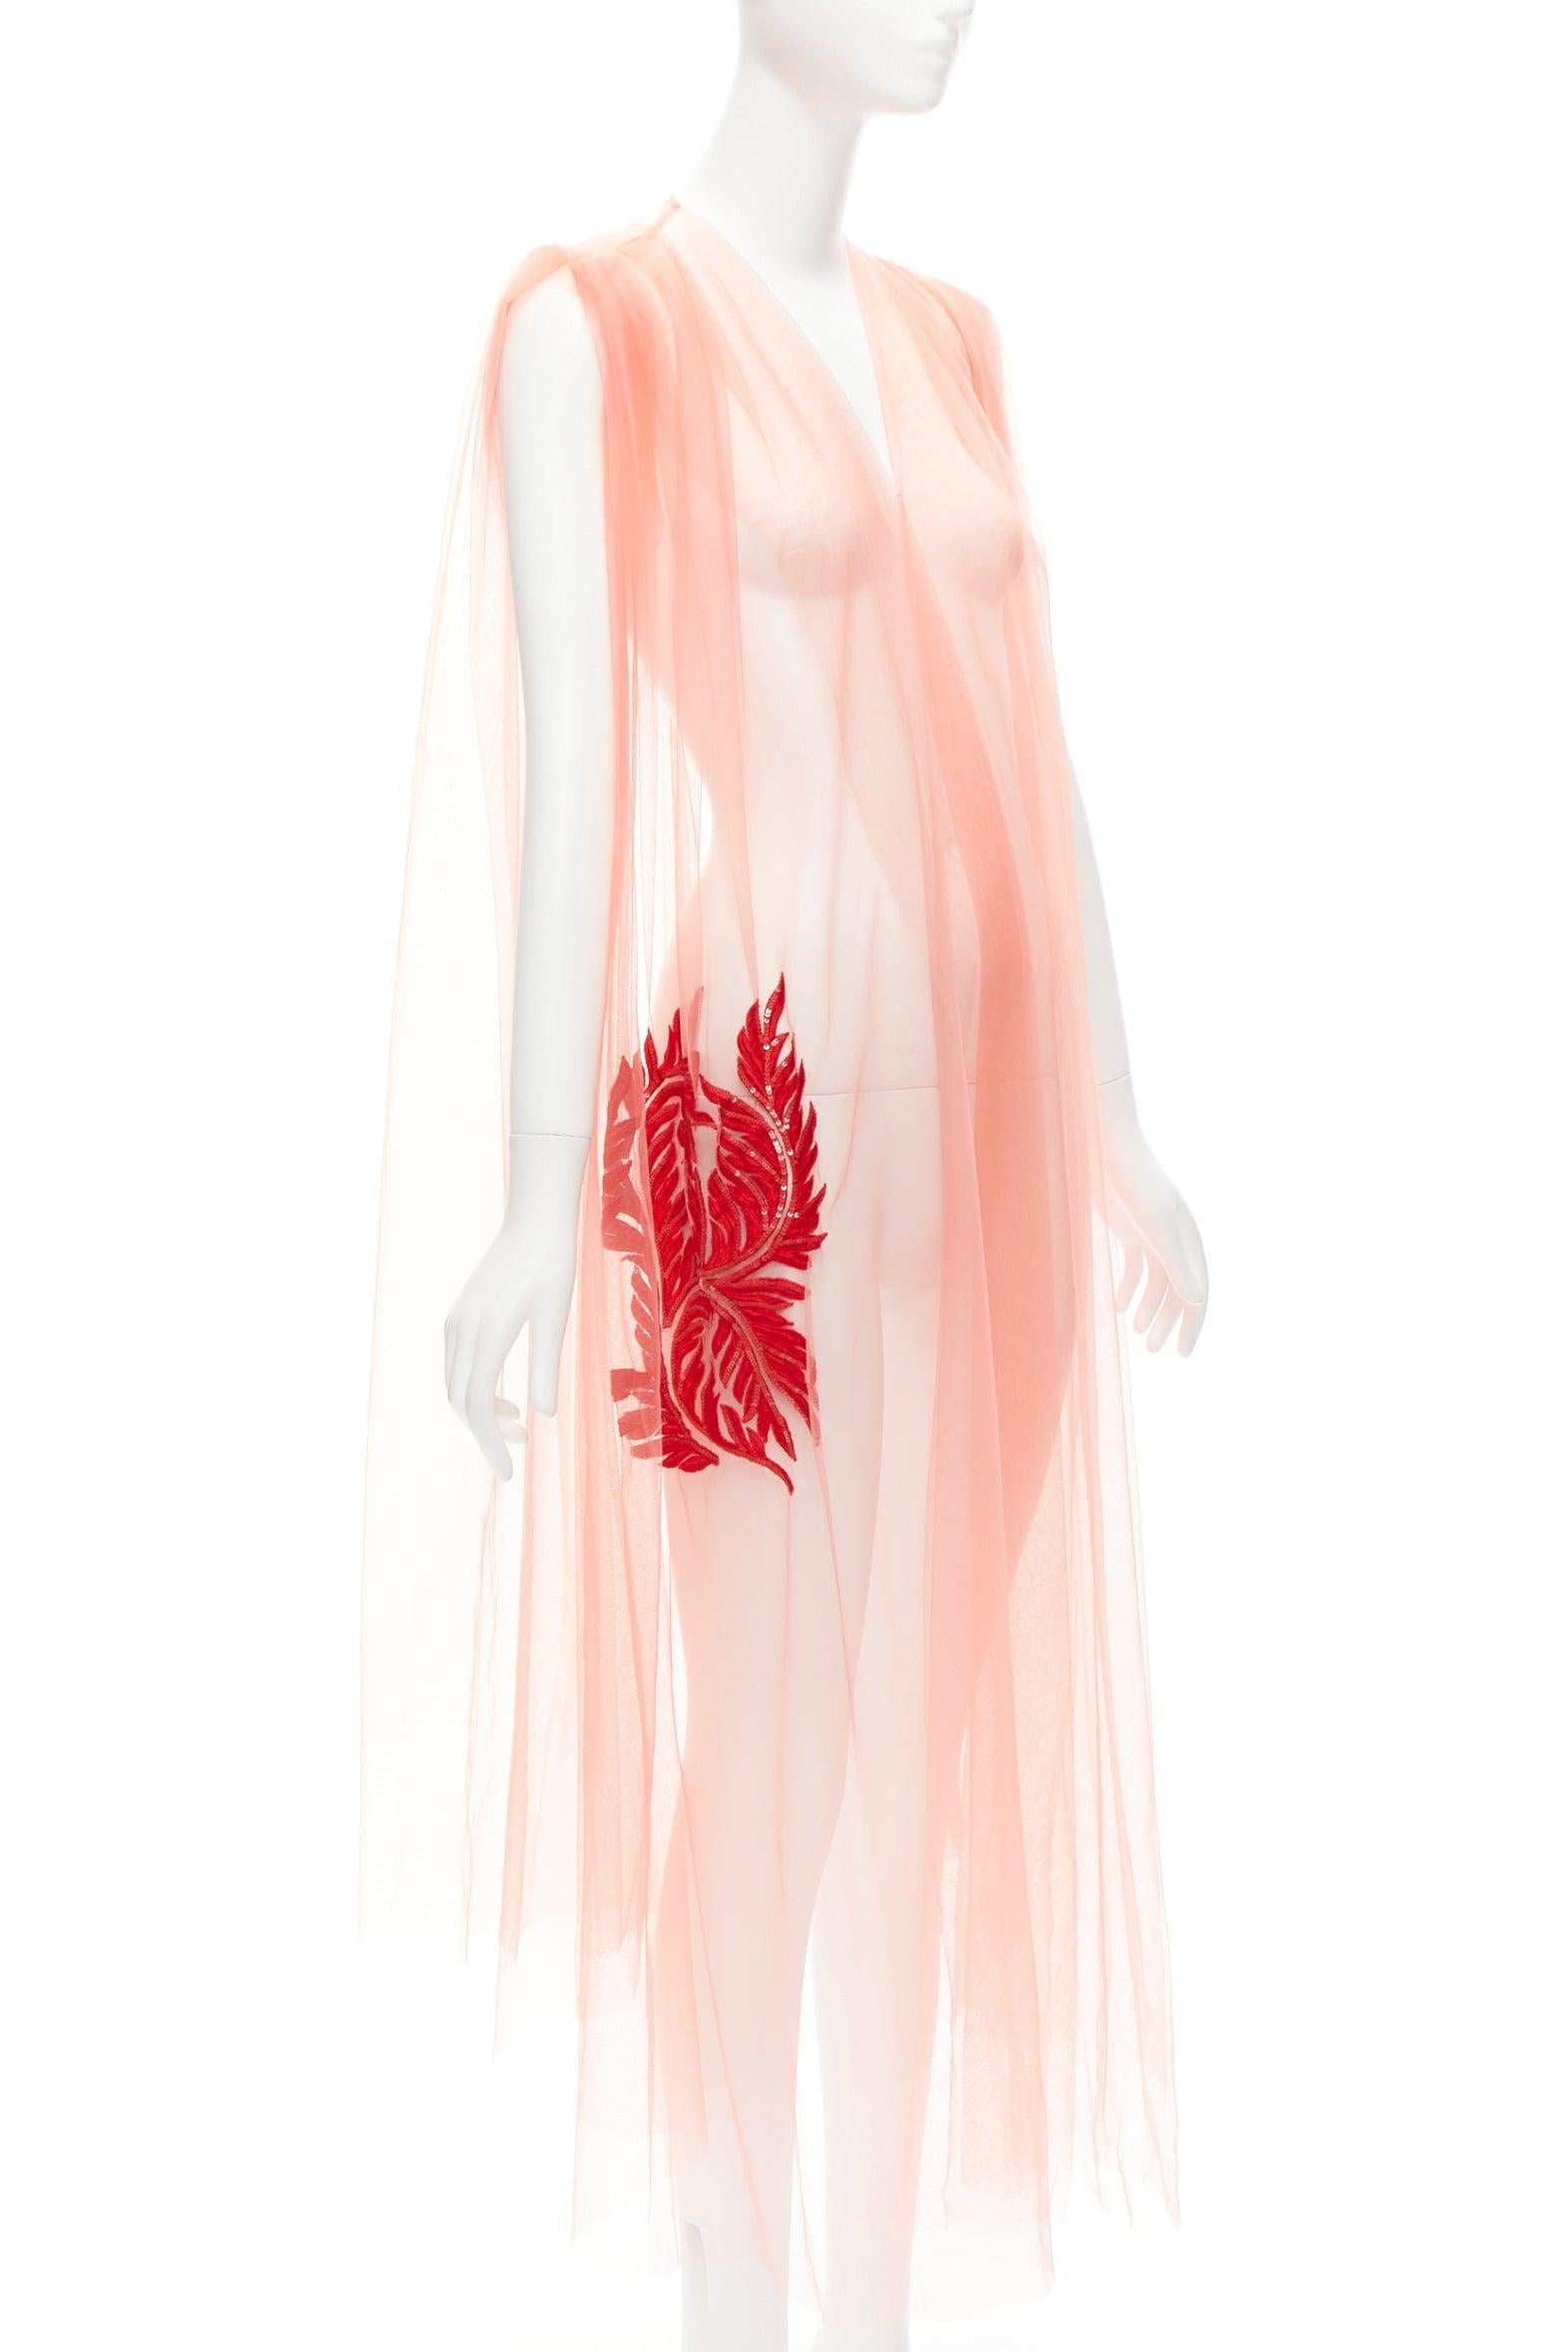 DRIES VAN NOTEN pink tulle red leaf embroidery V neck sheer fairy dress
Reference: CELG/A00355
Brand: Dries Van Noten
Material: Mesh
Color: Pink, Red
Pattern: Solid
Closure: Slip On

CONDITION:
Condition: Excellent, this item was pre-owned and is in